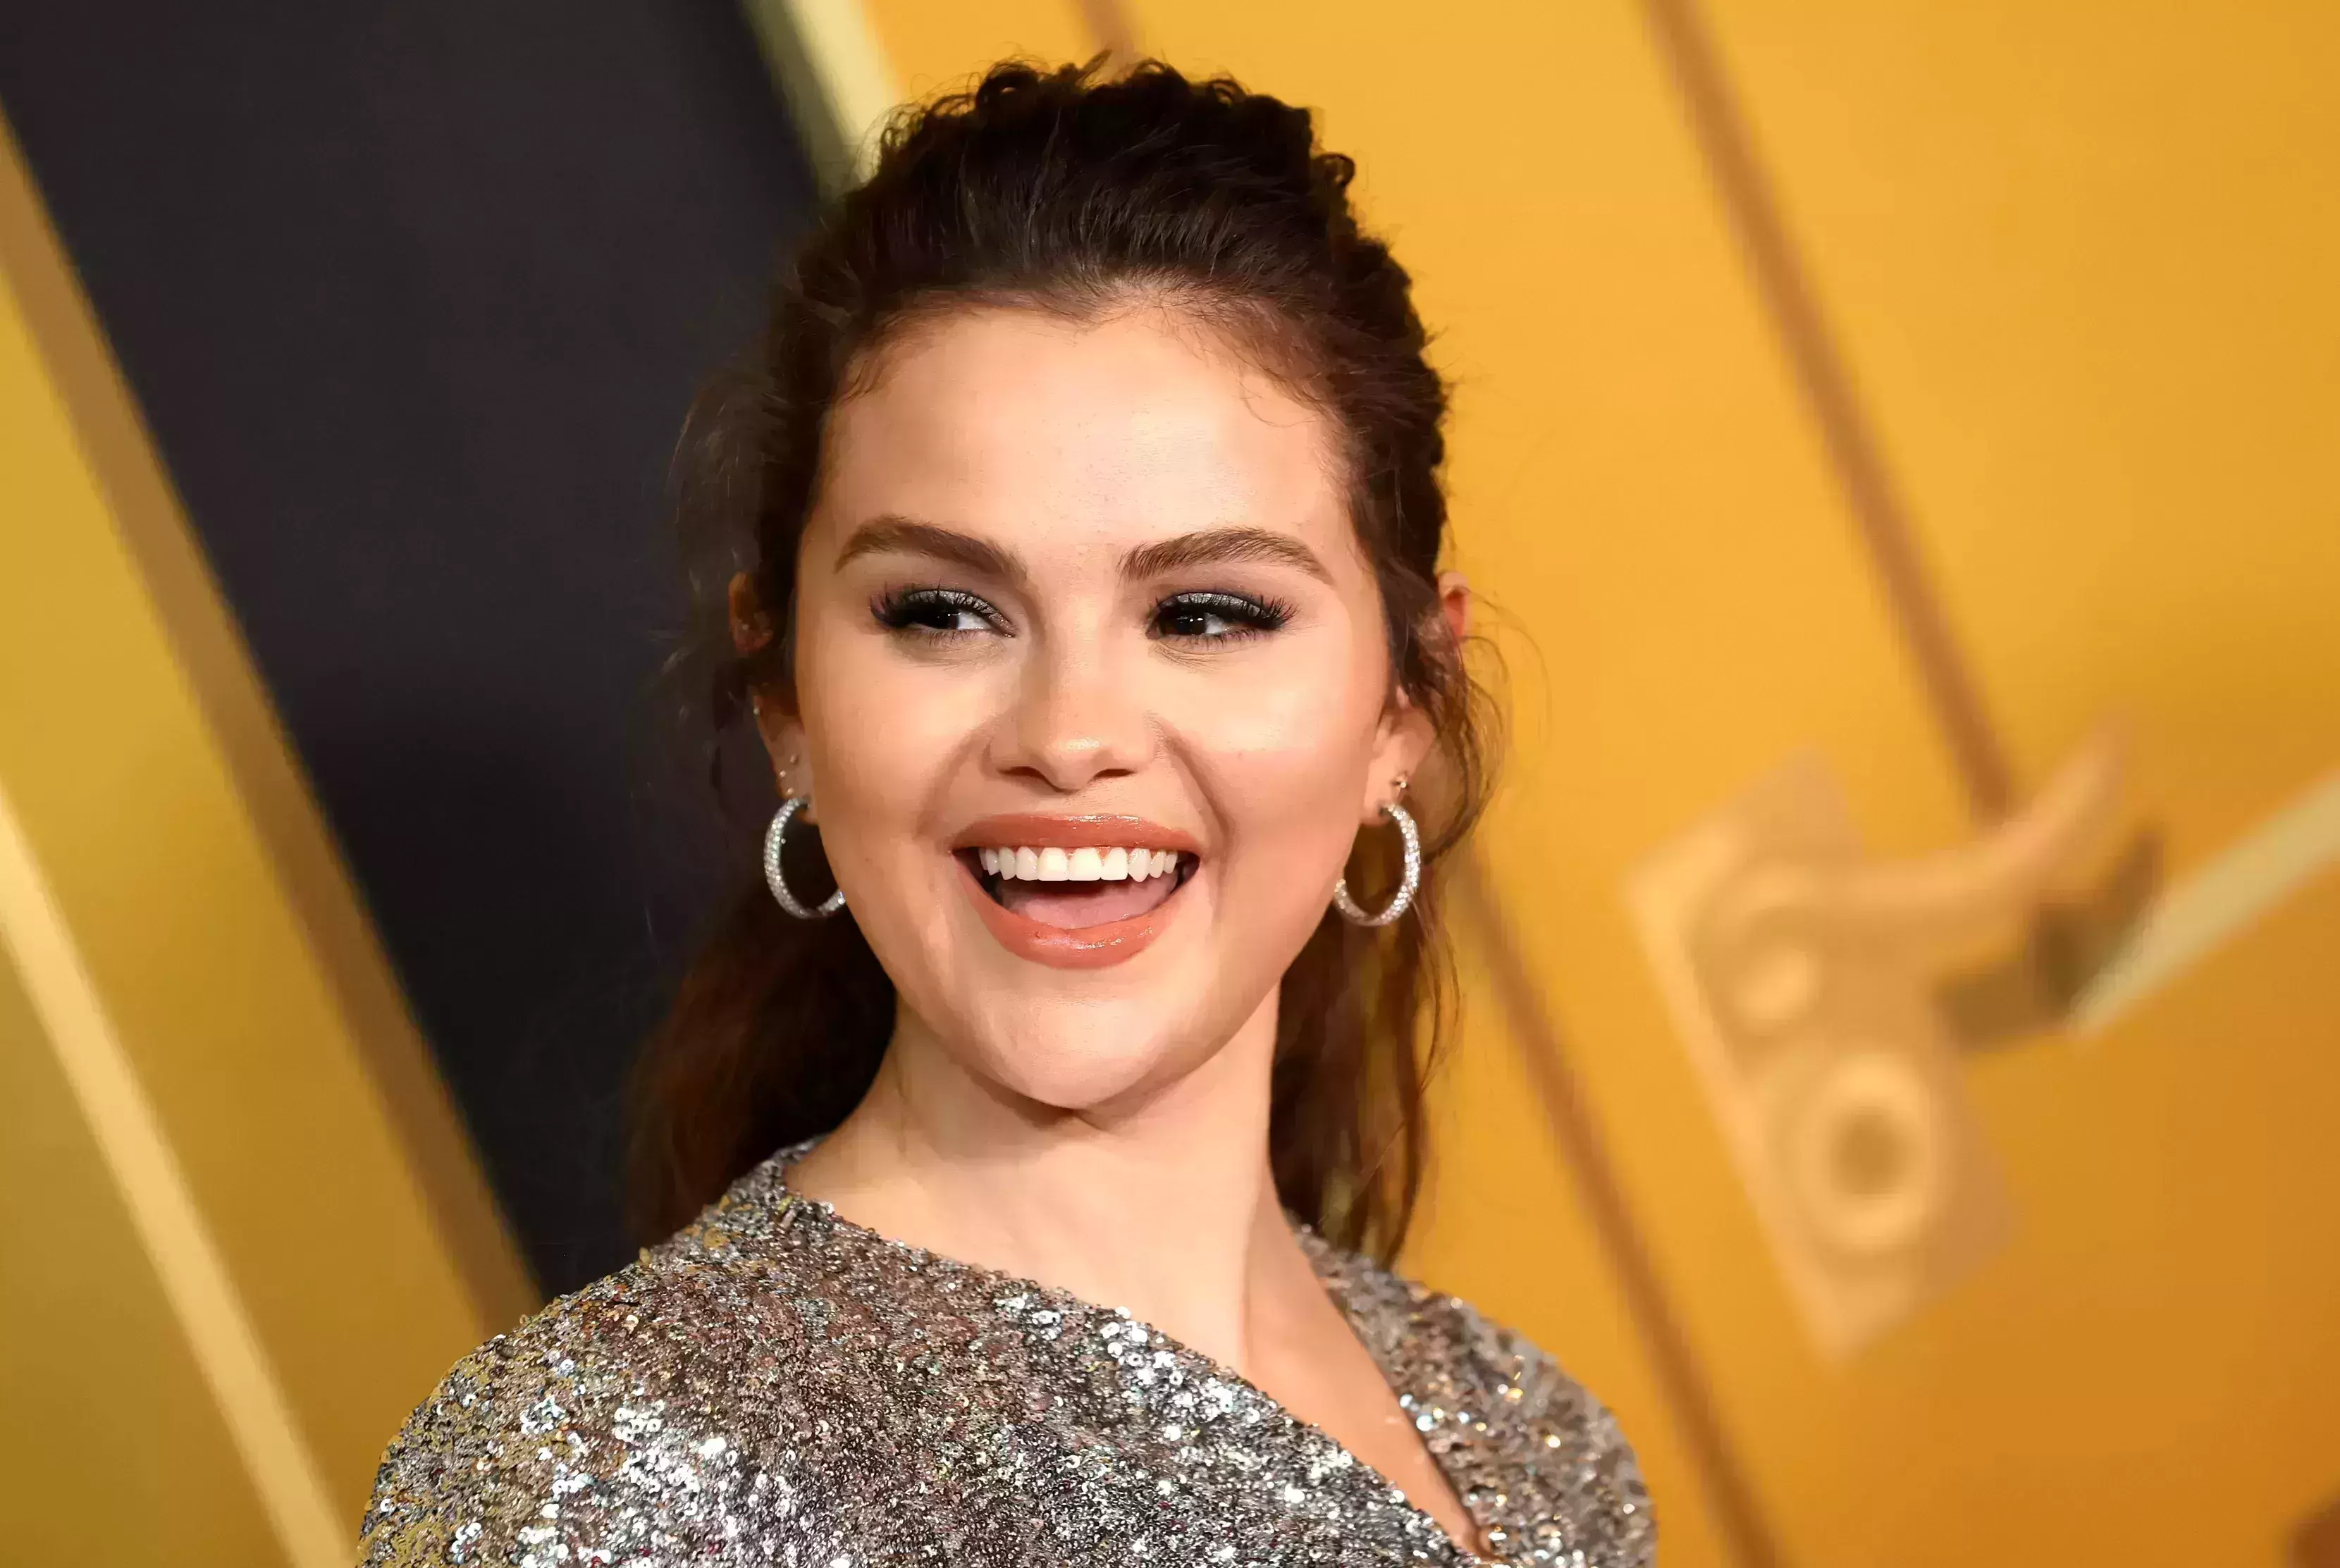 Selena Gomez reflects on the responsibility of being a role model